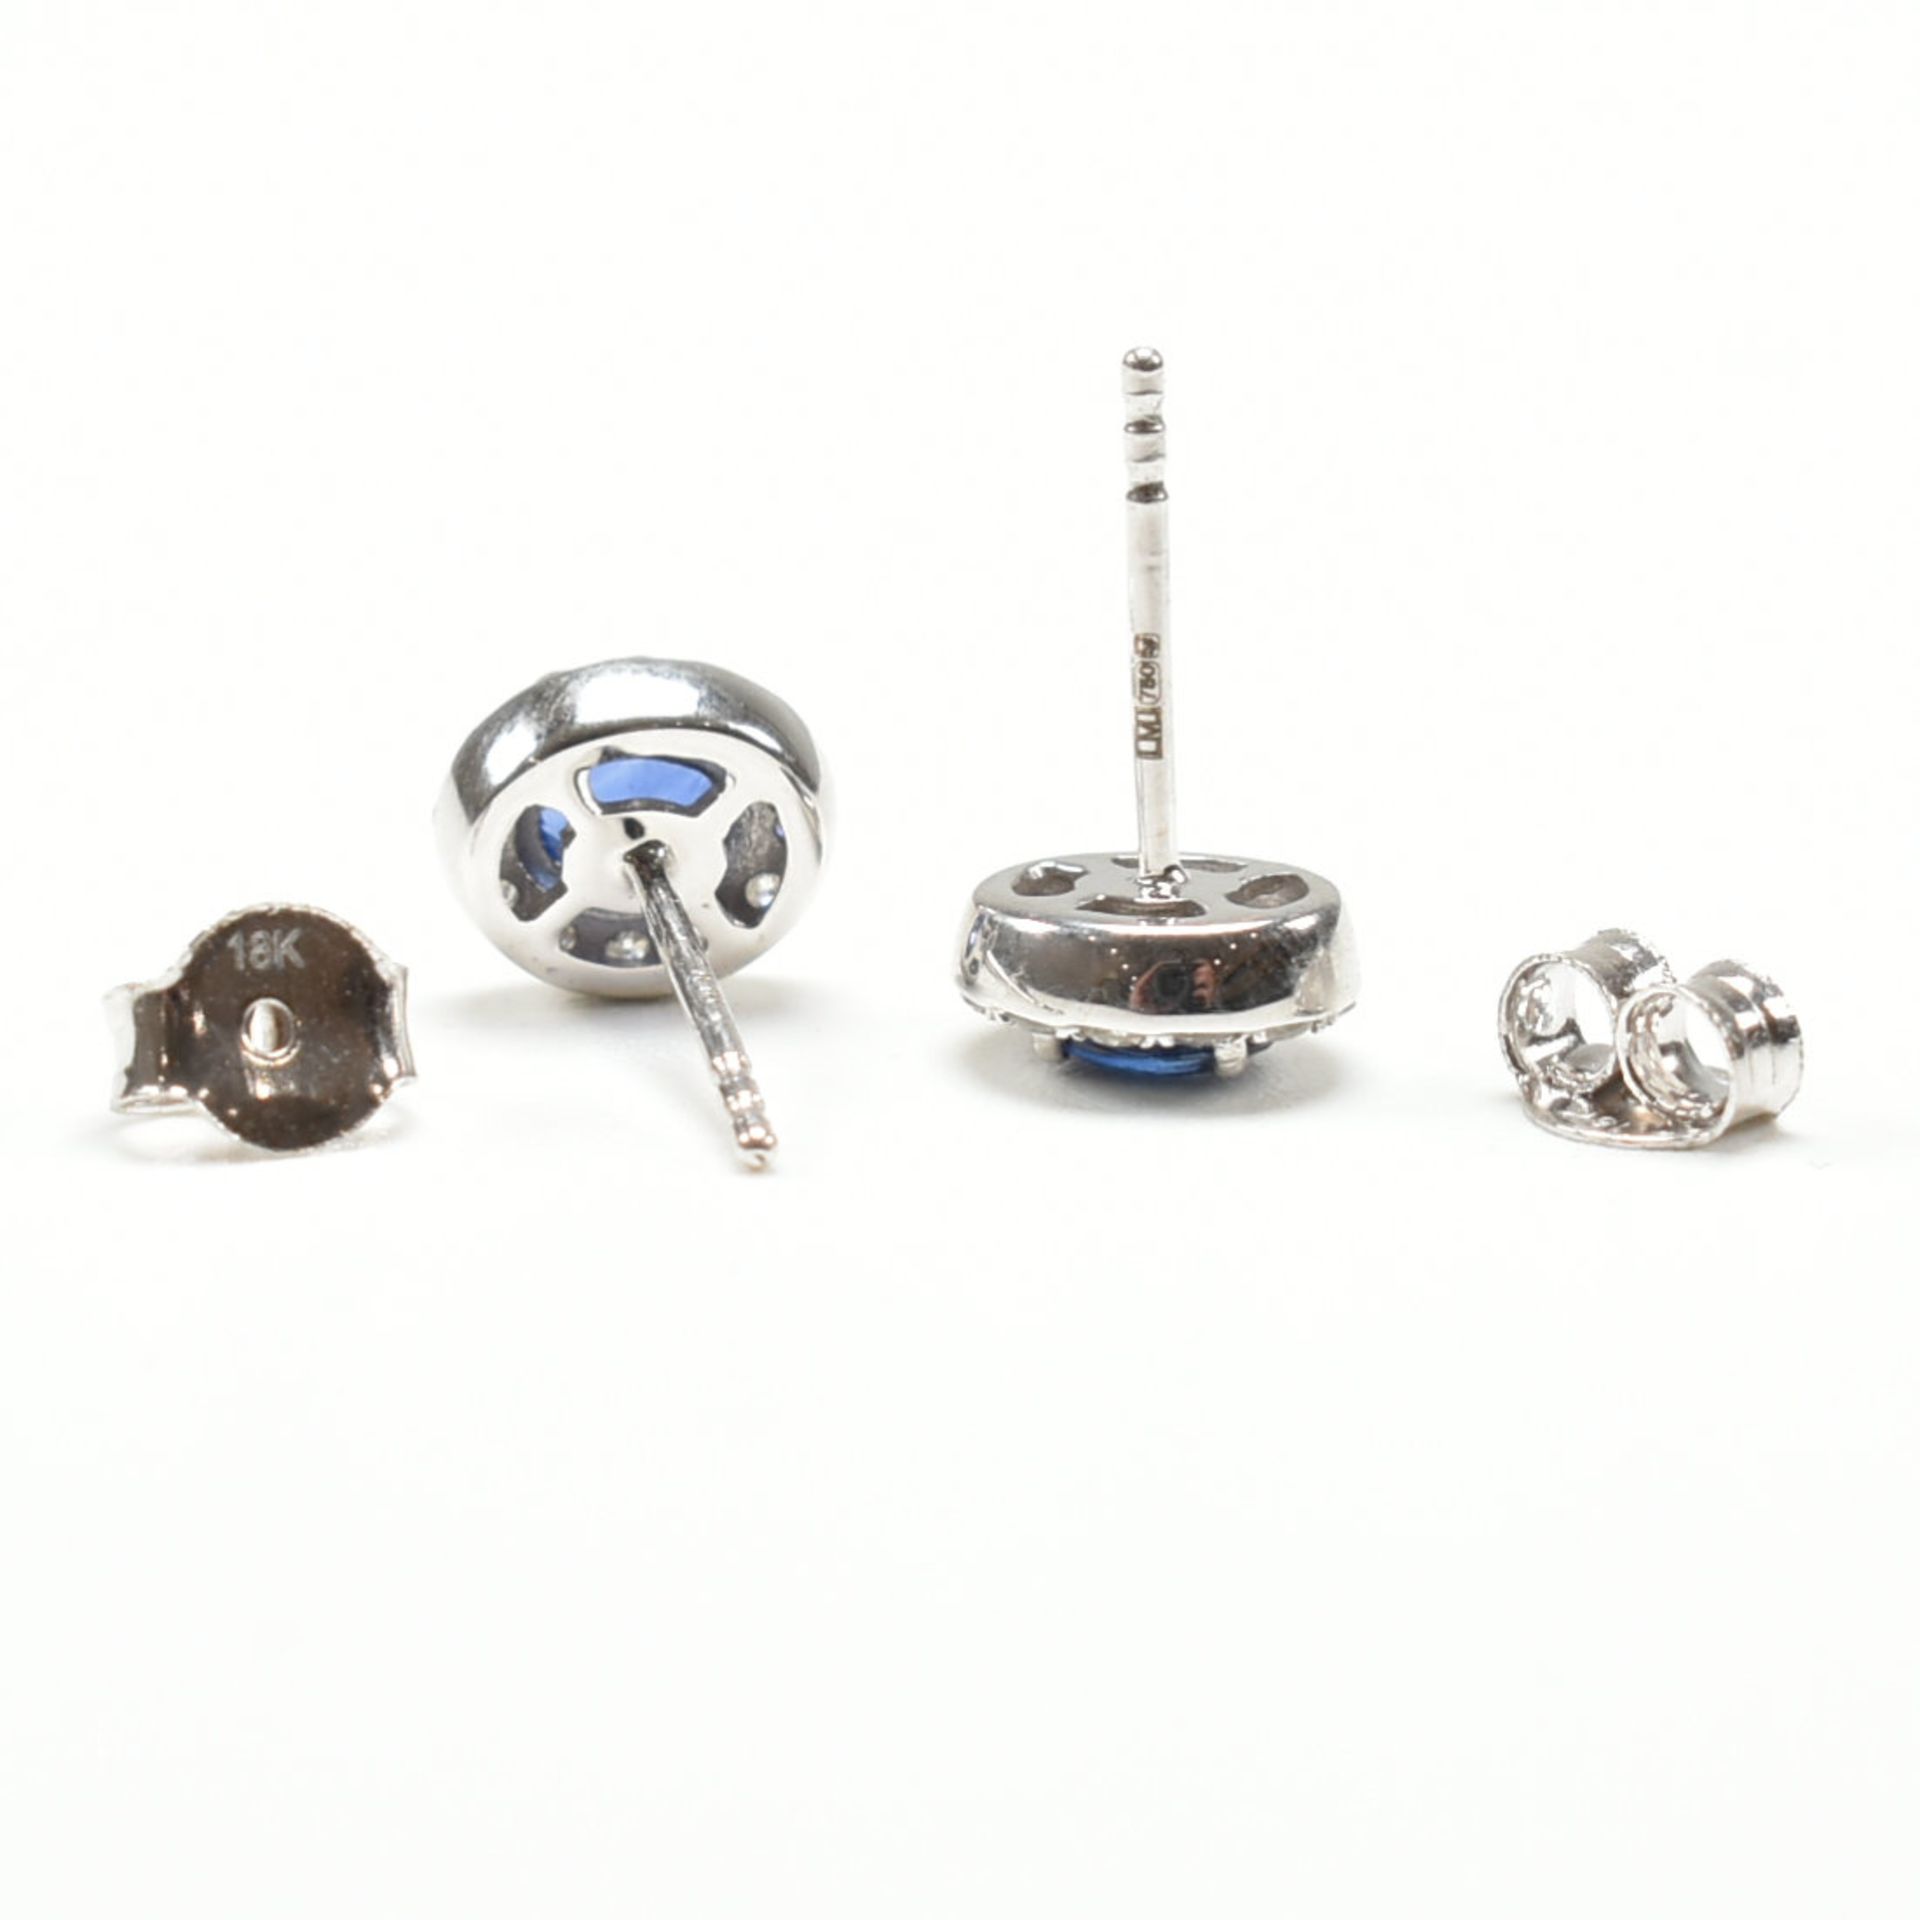 PAIR OF 18CT WHITE GOLD DIAMOND & SAPPHIRE STUD EARRINGS - Image 5 of 5